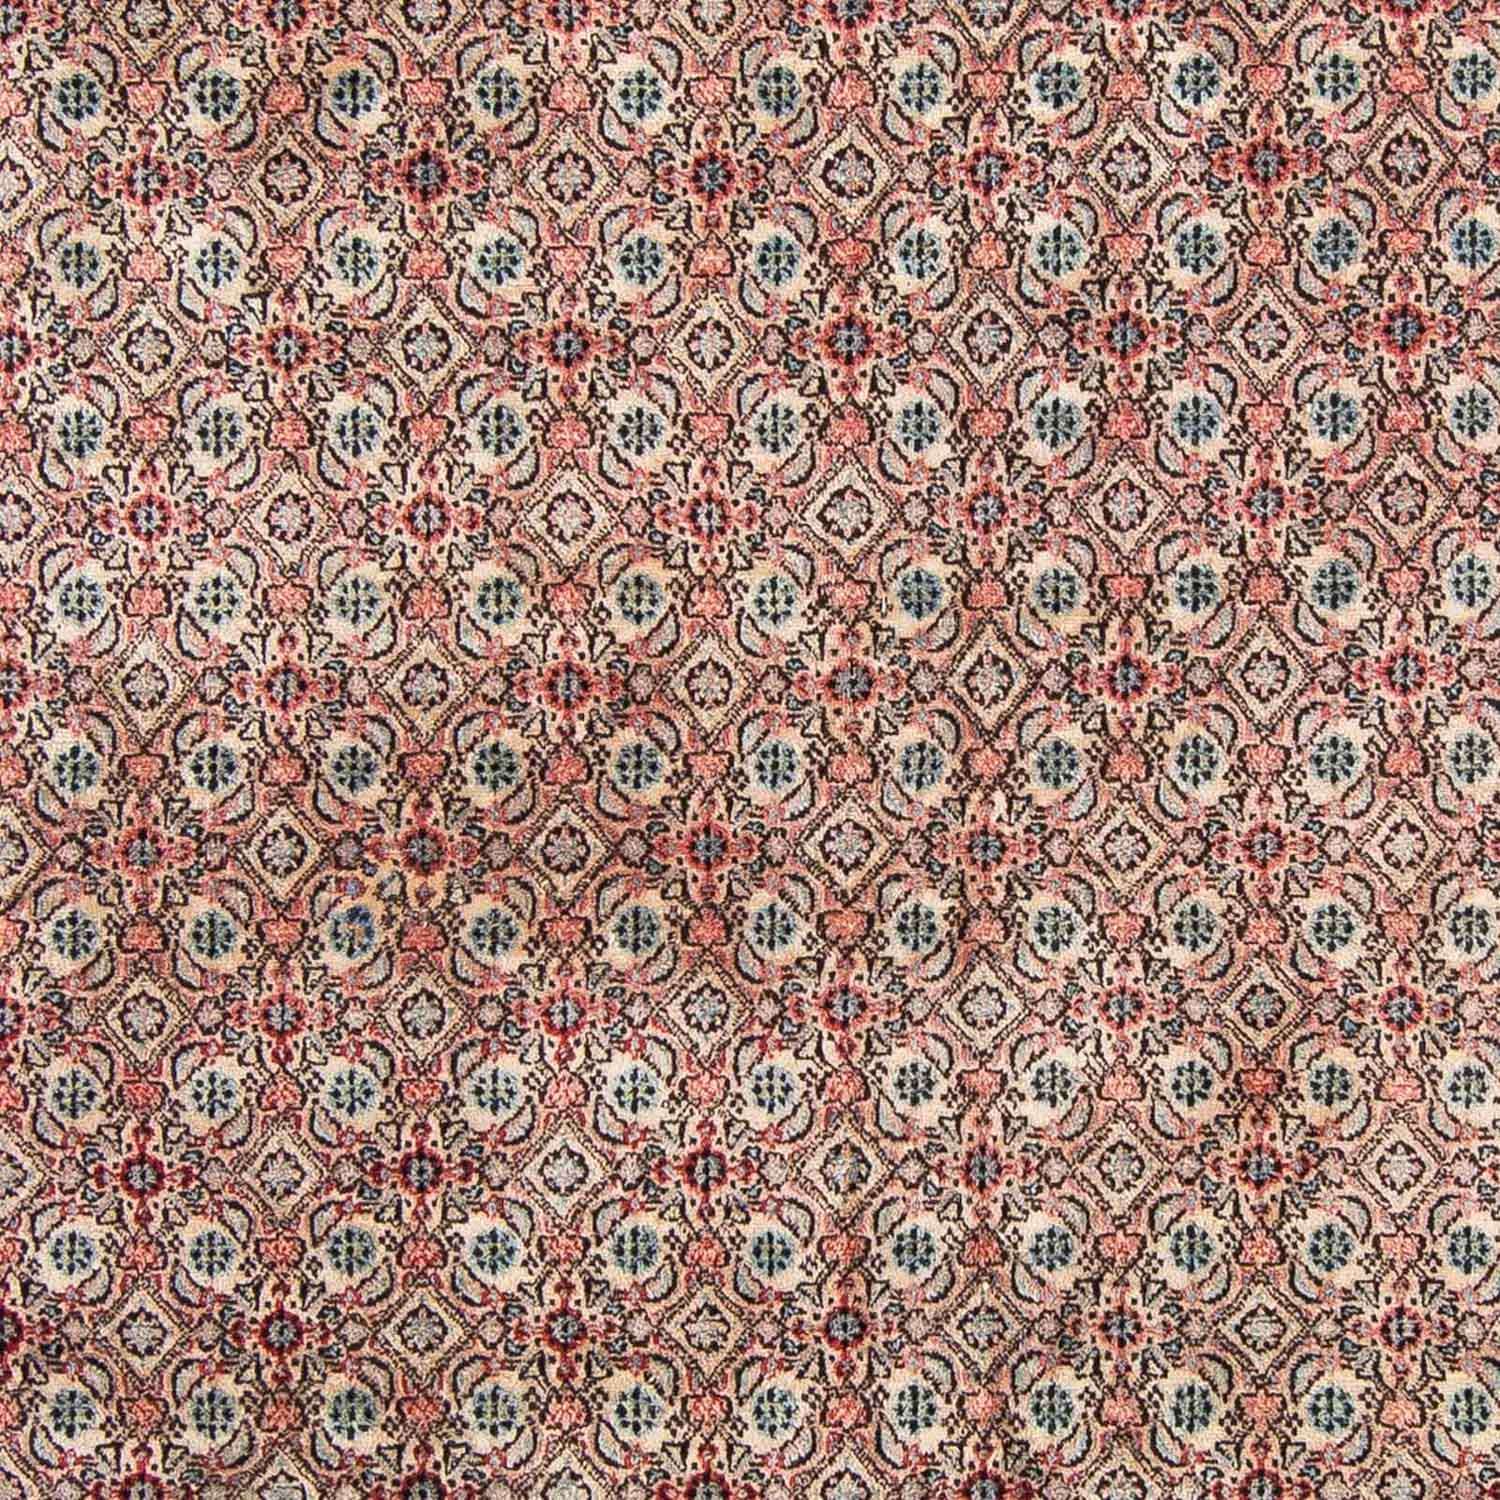 Perser Rug - Classic - 296 x 207 cm - light red